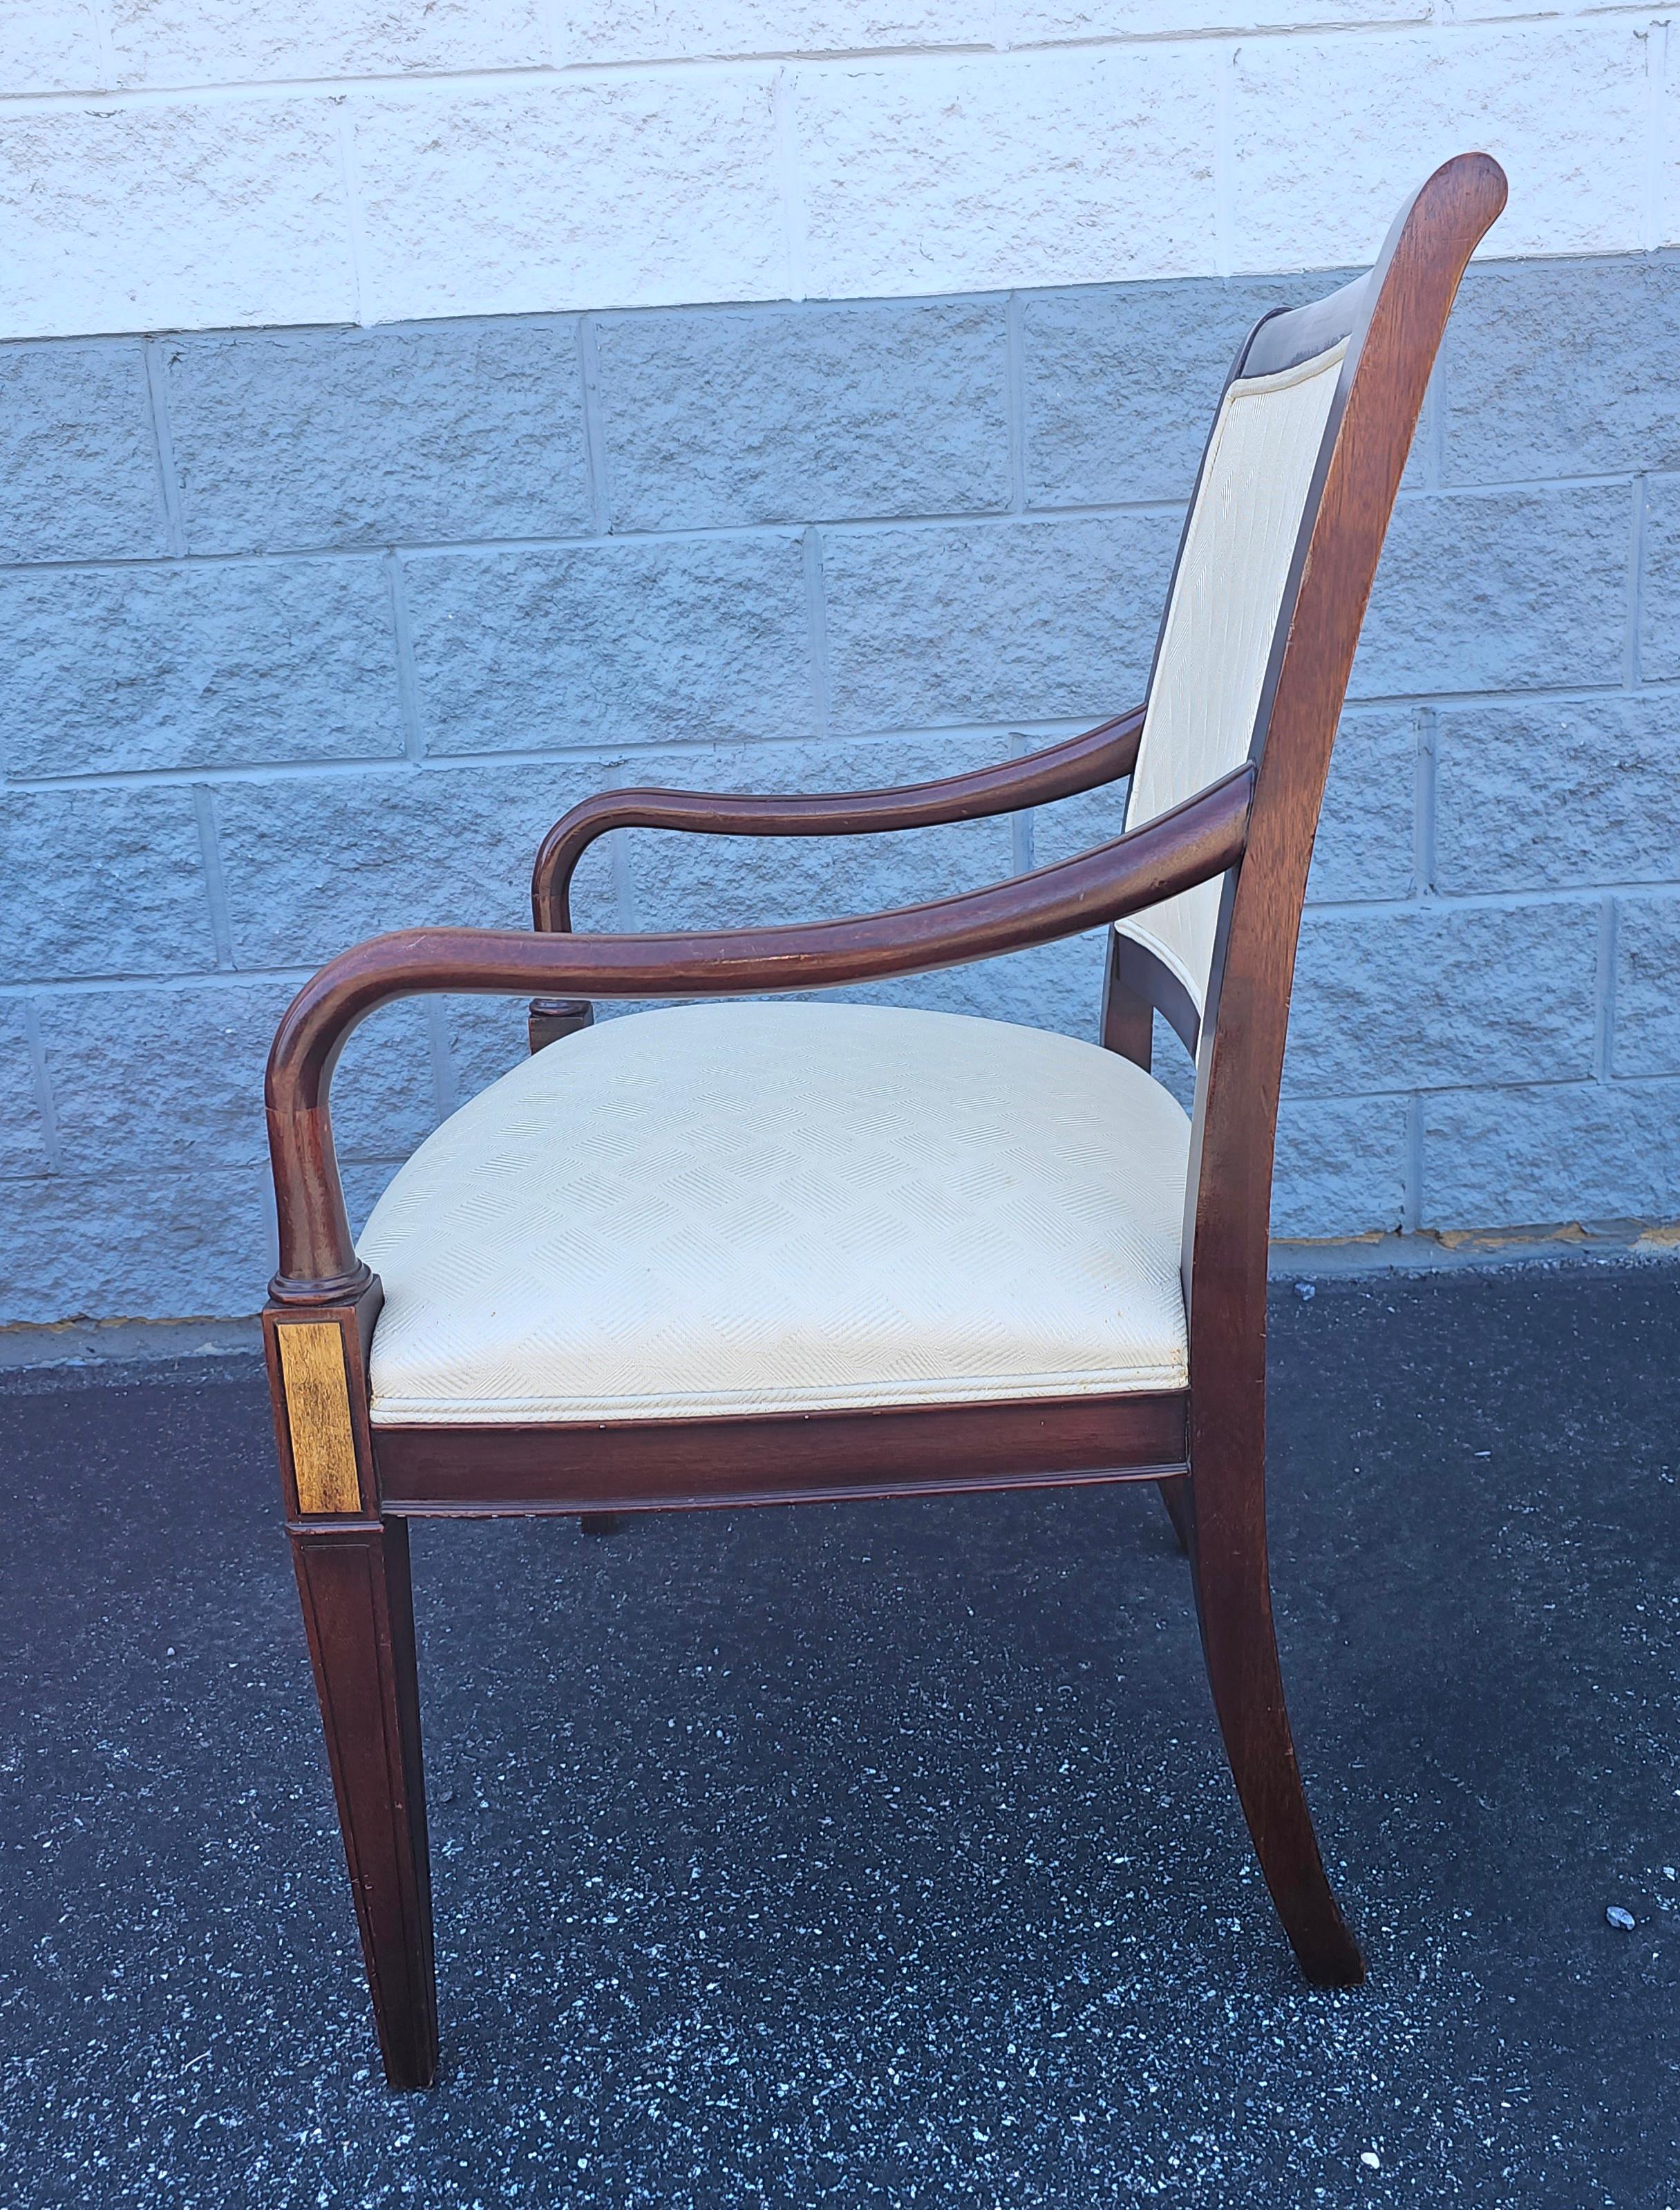 20th C. Hickory Chair Federal Style Mahogany Inlaid and Upholstered Arm Chair In Good Condition For Sale In Germantown, MD